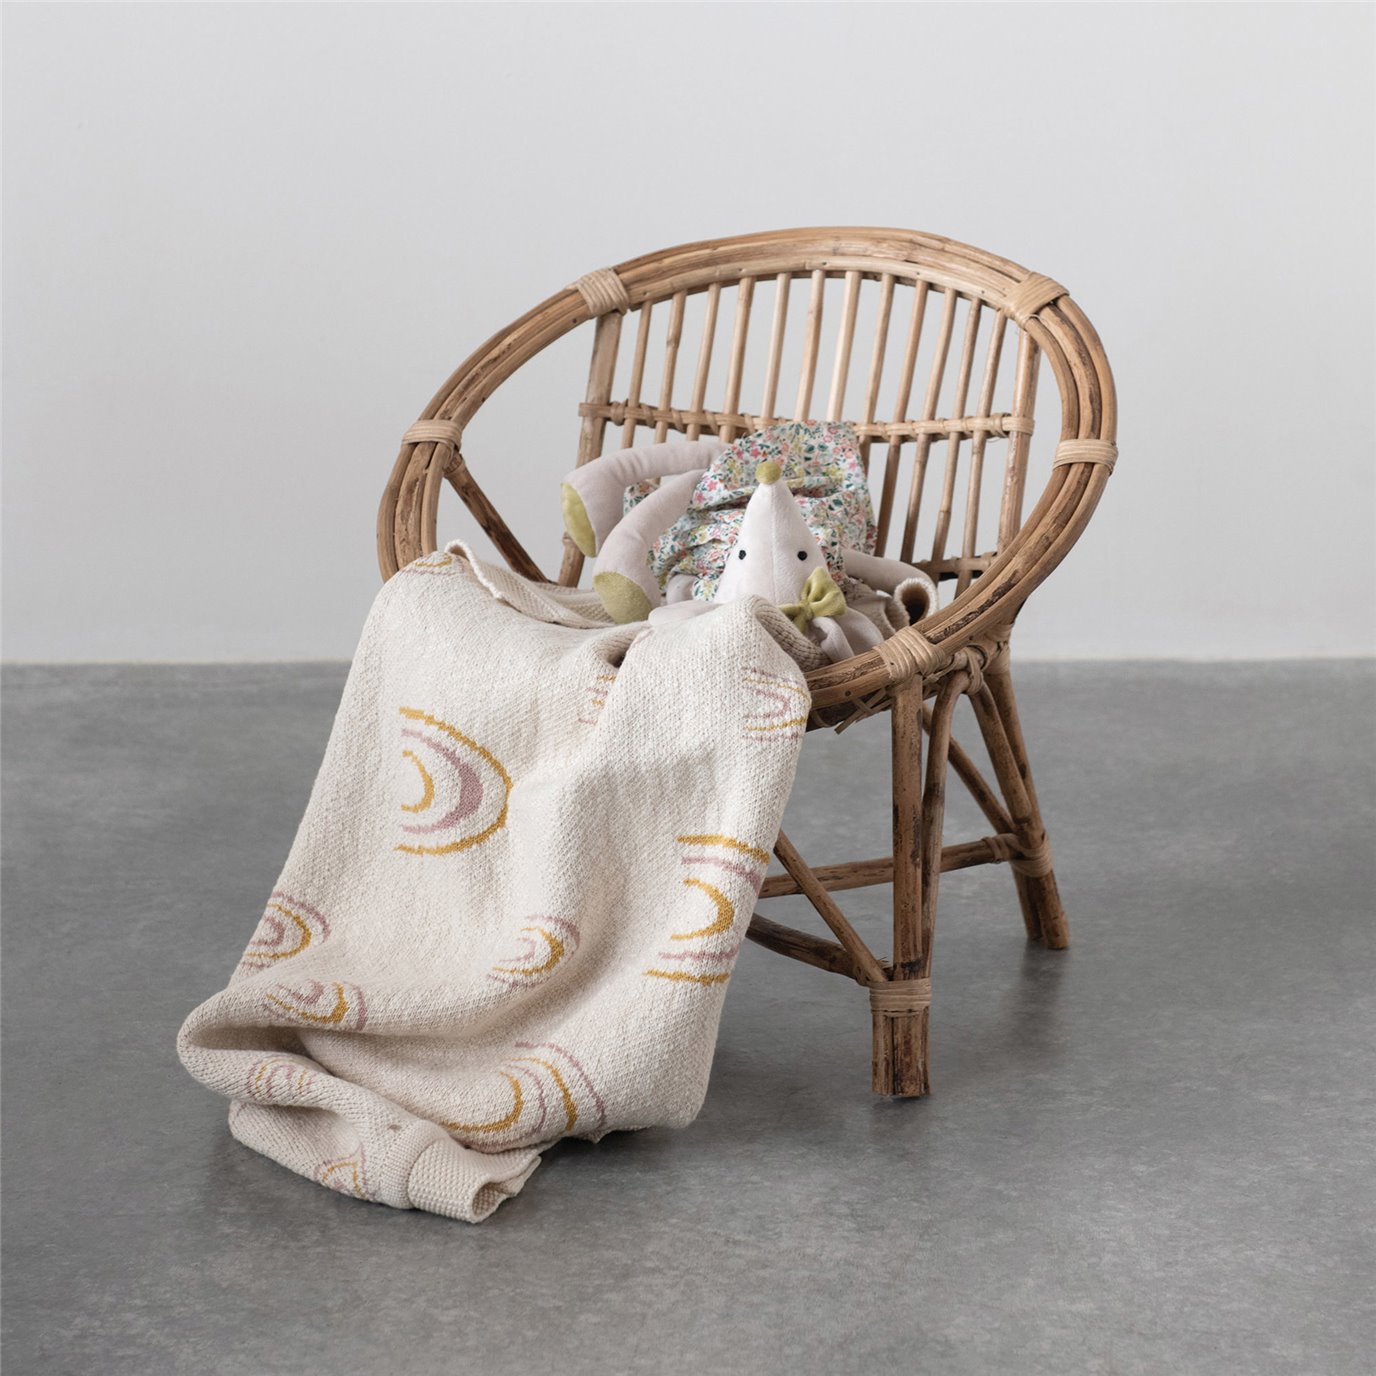 Hand-Woven Rattan Chair, Natural by Creative Co-op